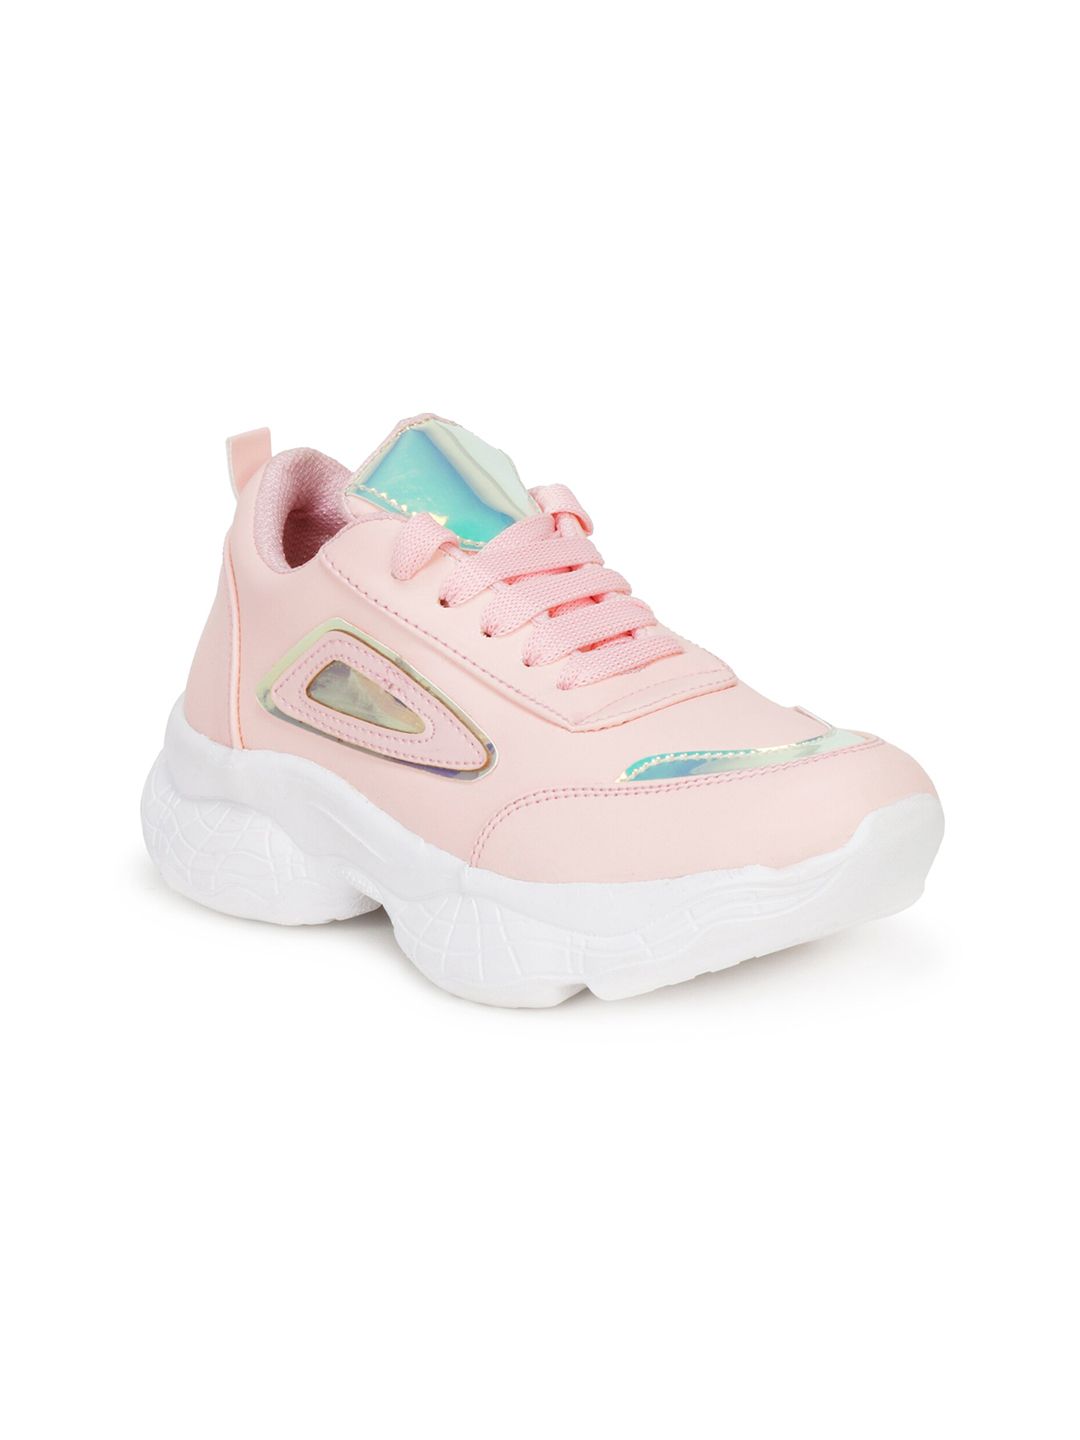 Denill Women Pink Running Shoes Price in India